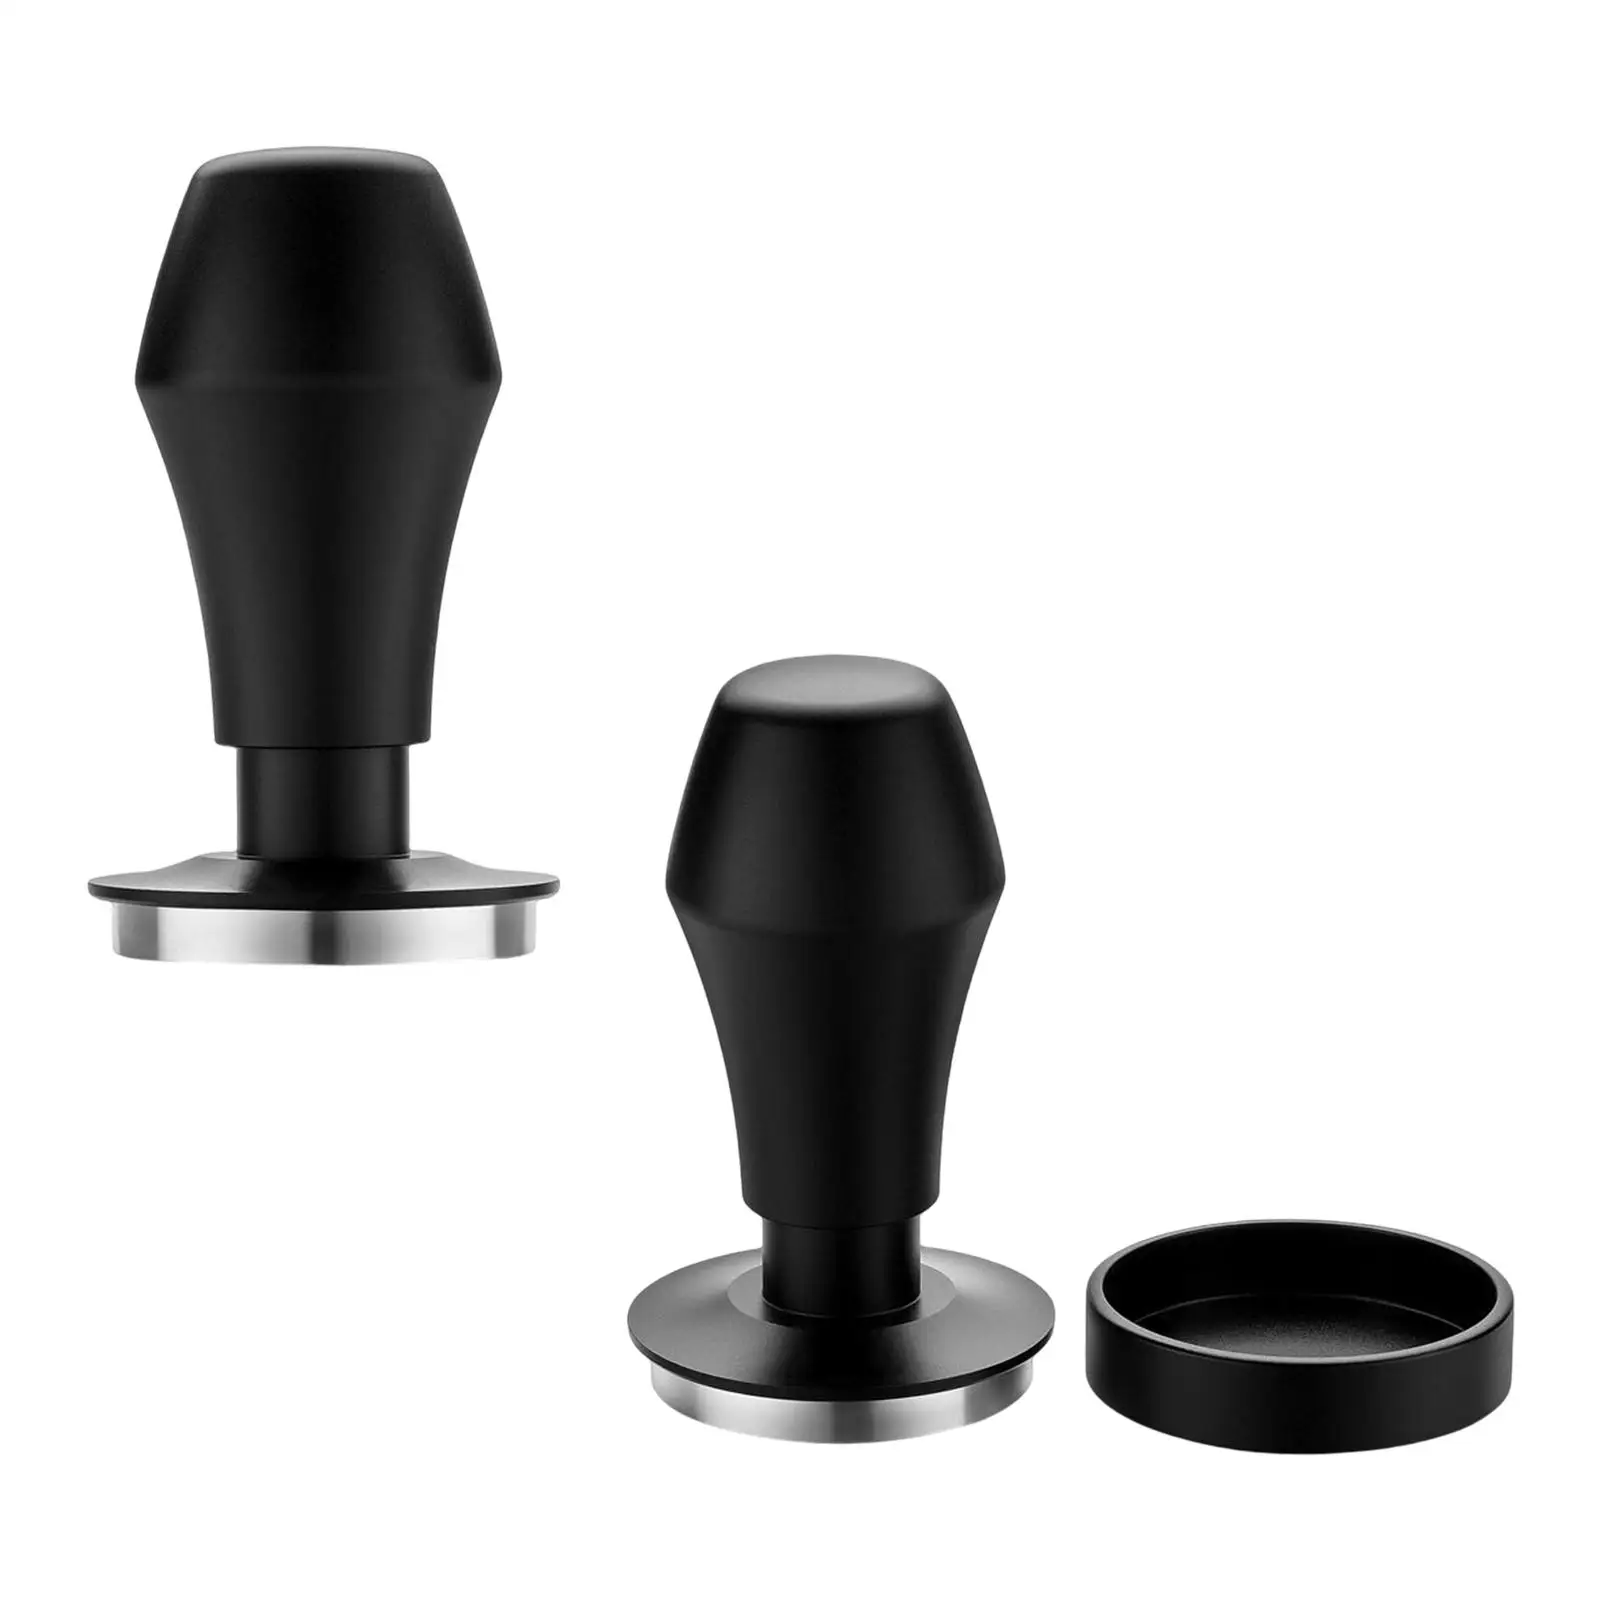 Professional Coffee Hand Tamper Coffee Bean Pressing Tool Reusable Calibrated Stainless Steel Espresso Tamper for Office Home